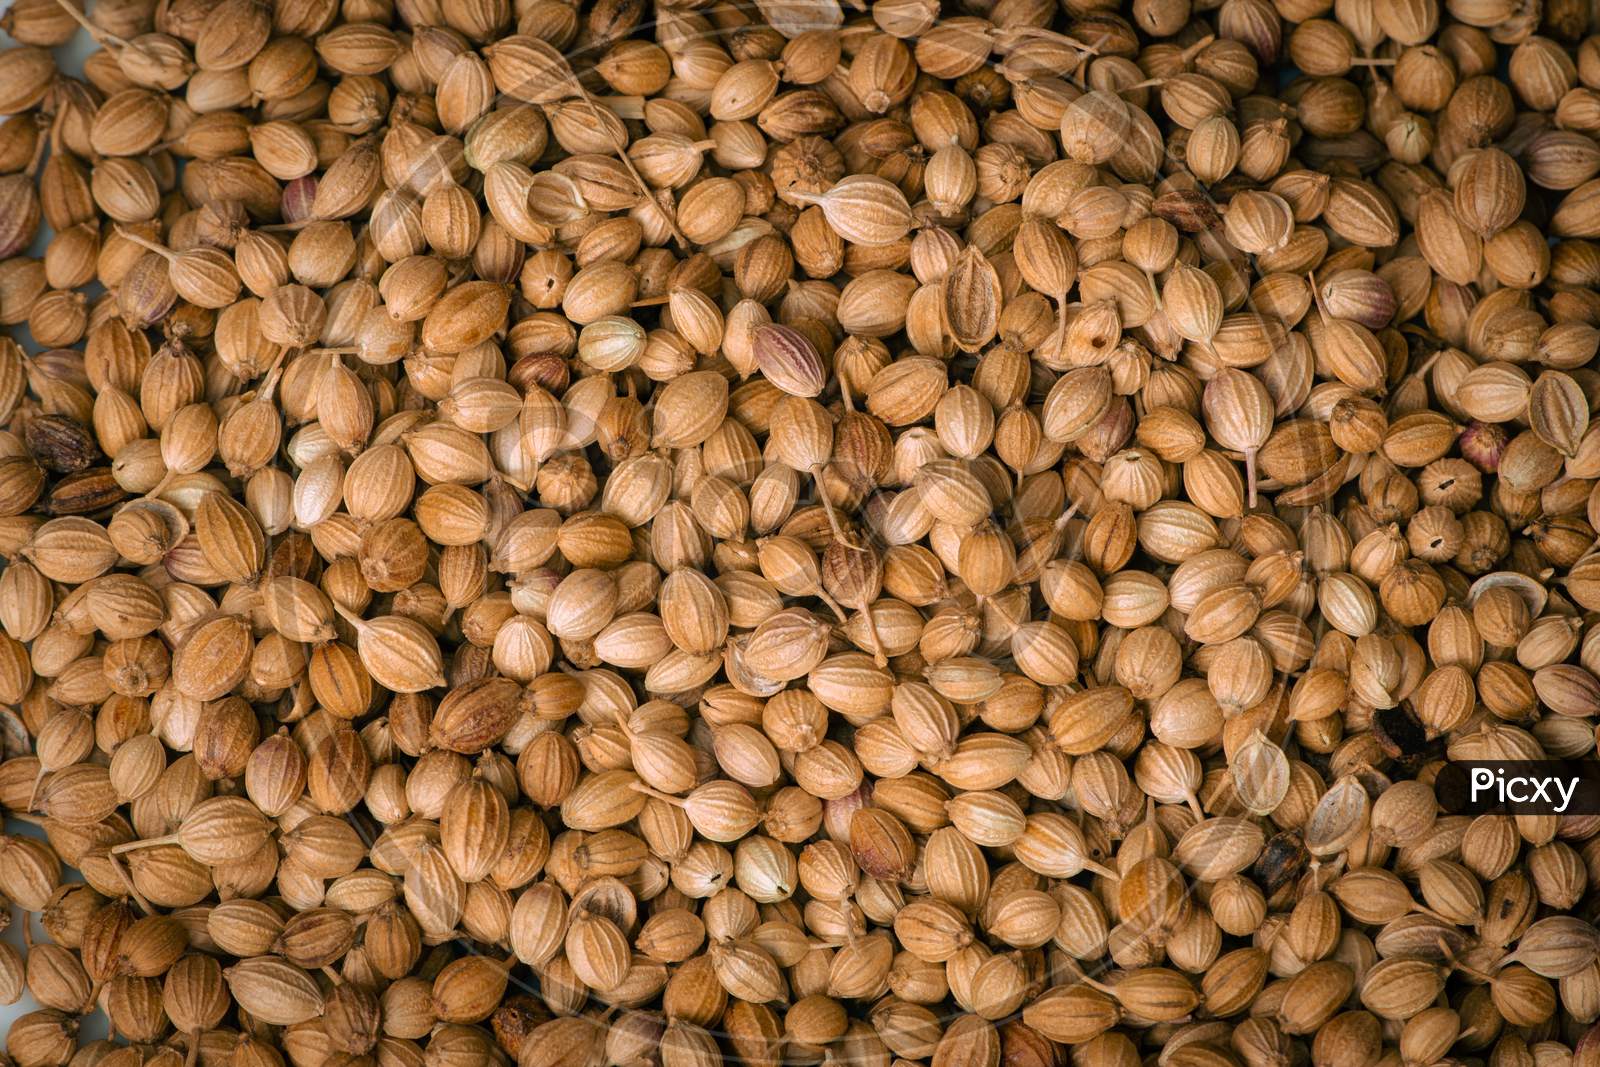 Top View Of Dried Coriander Fruits Also Known As Coriander Seeds.